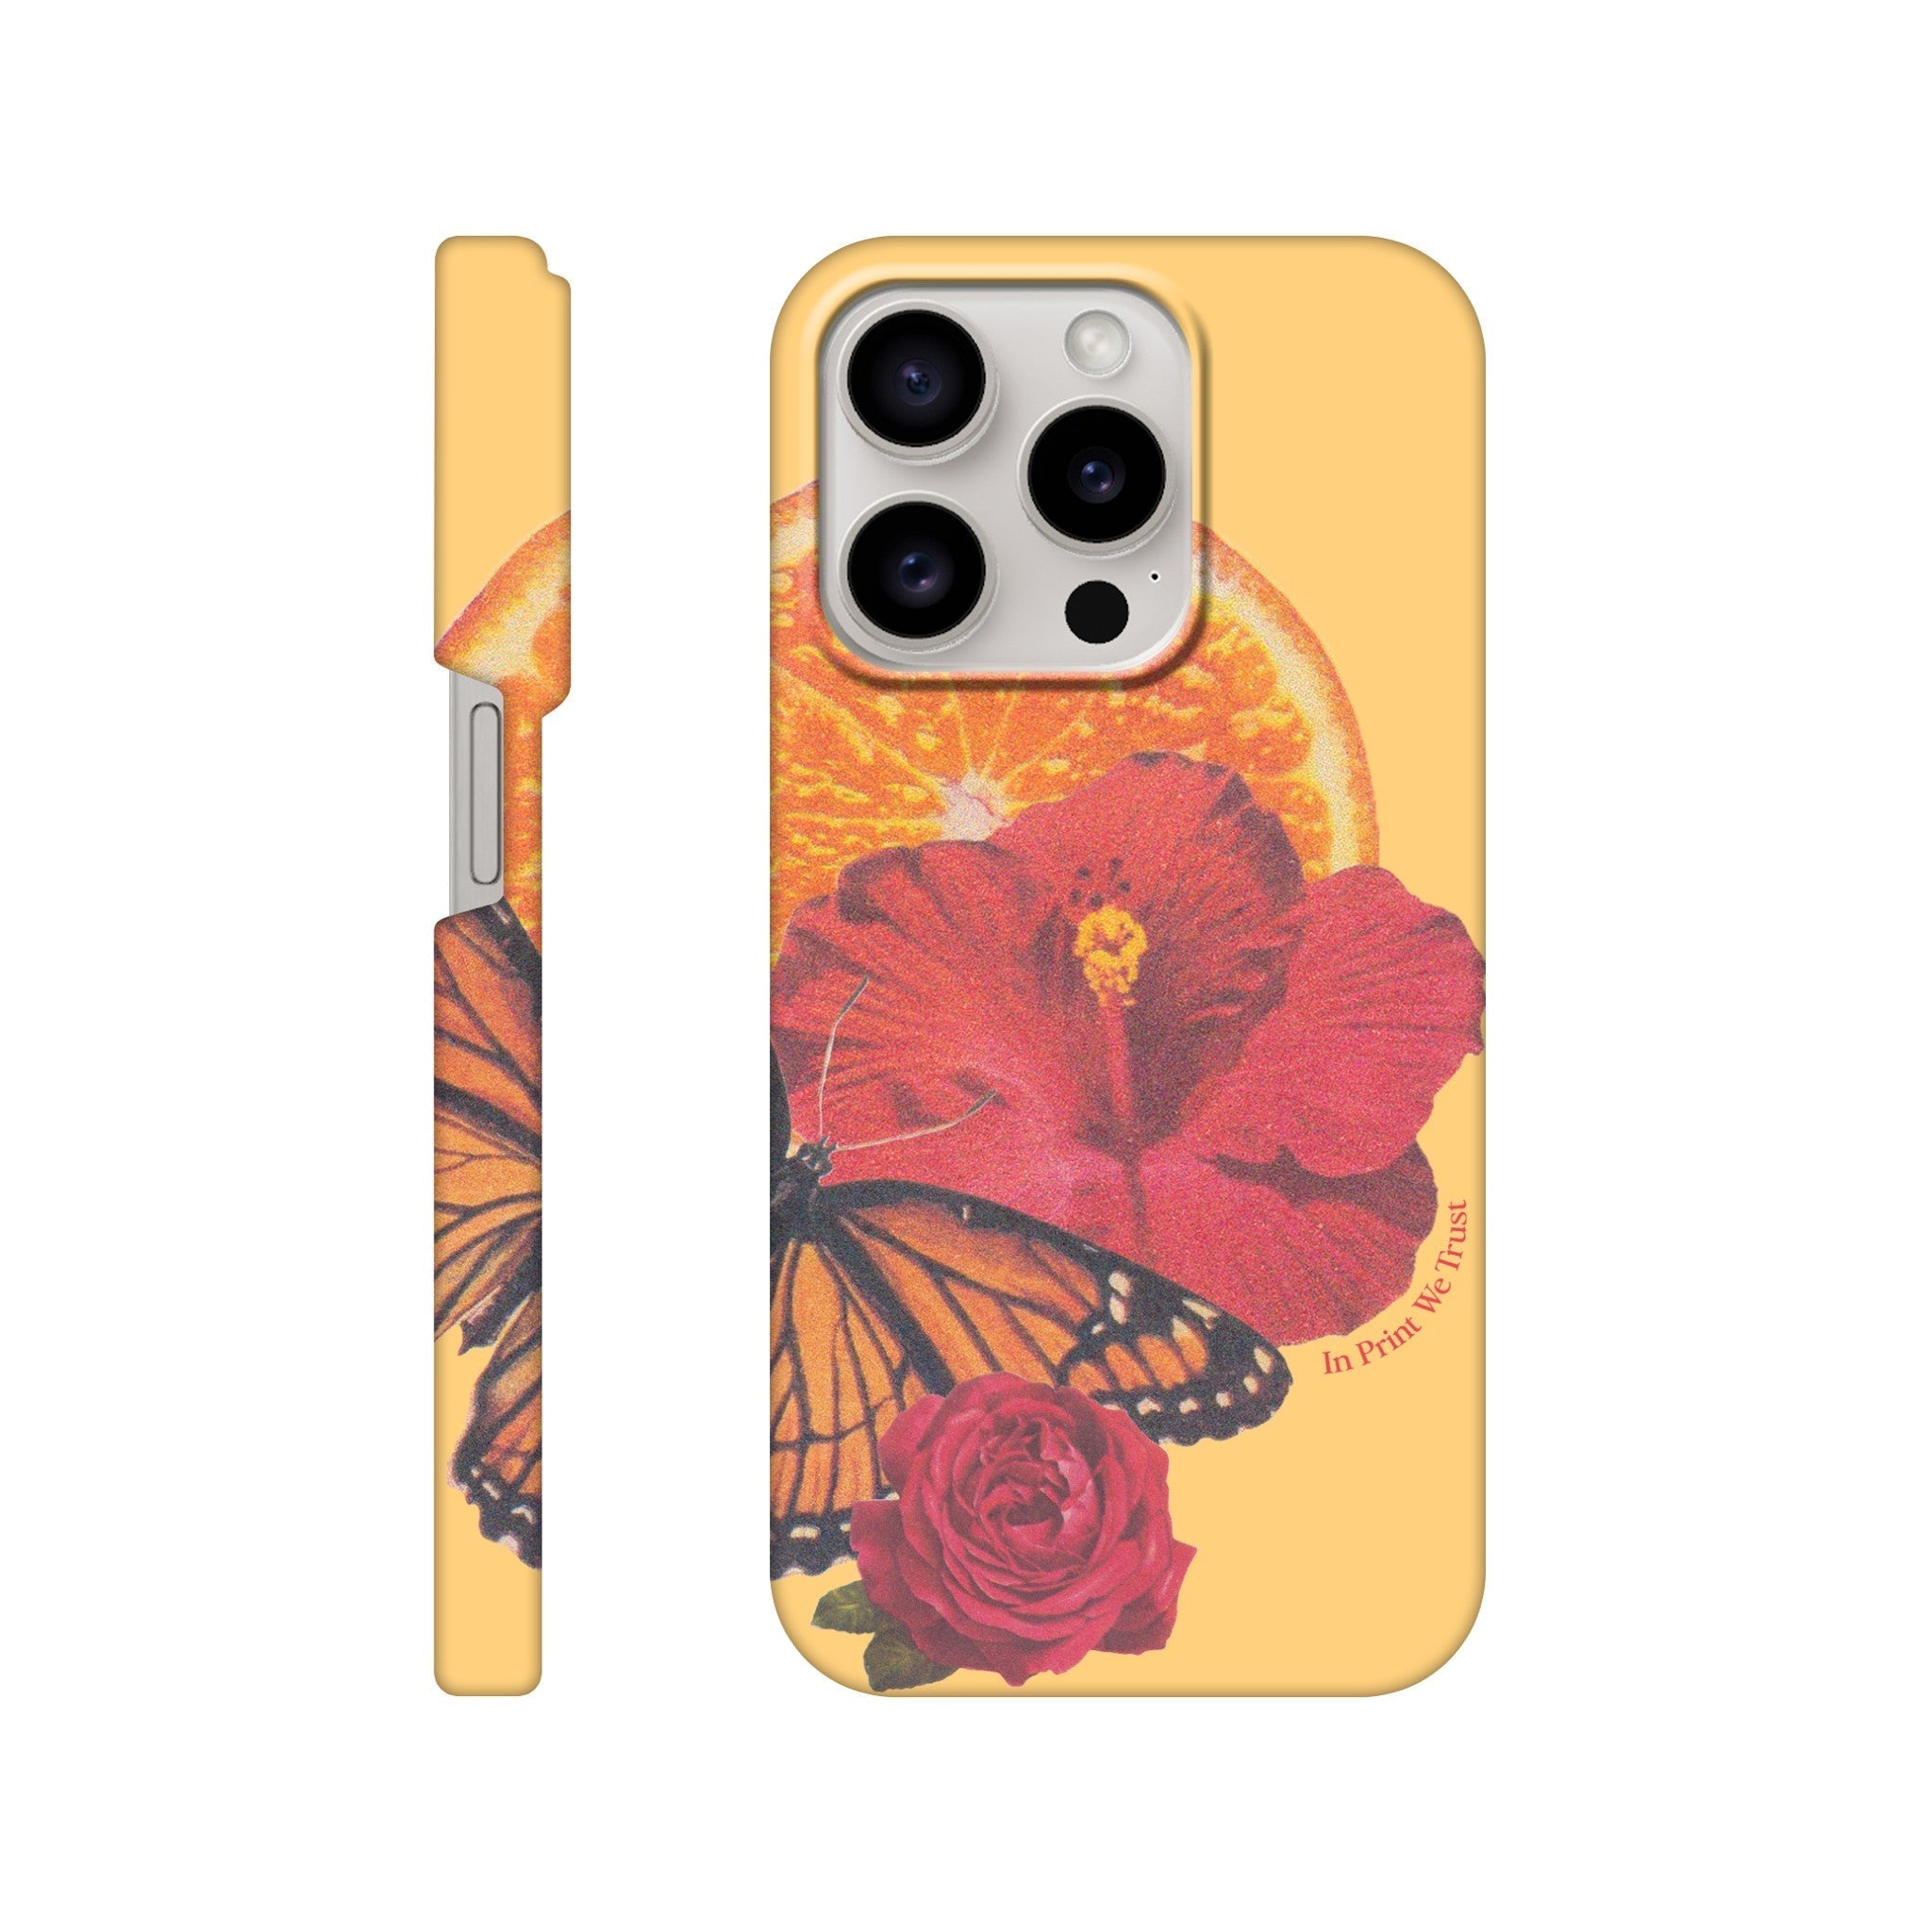 'Natural Beauty' phone case - In Print We Trust